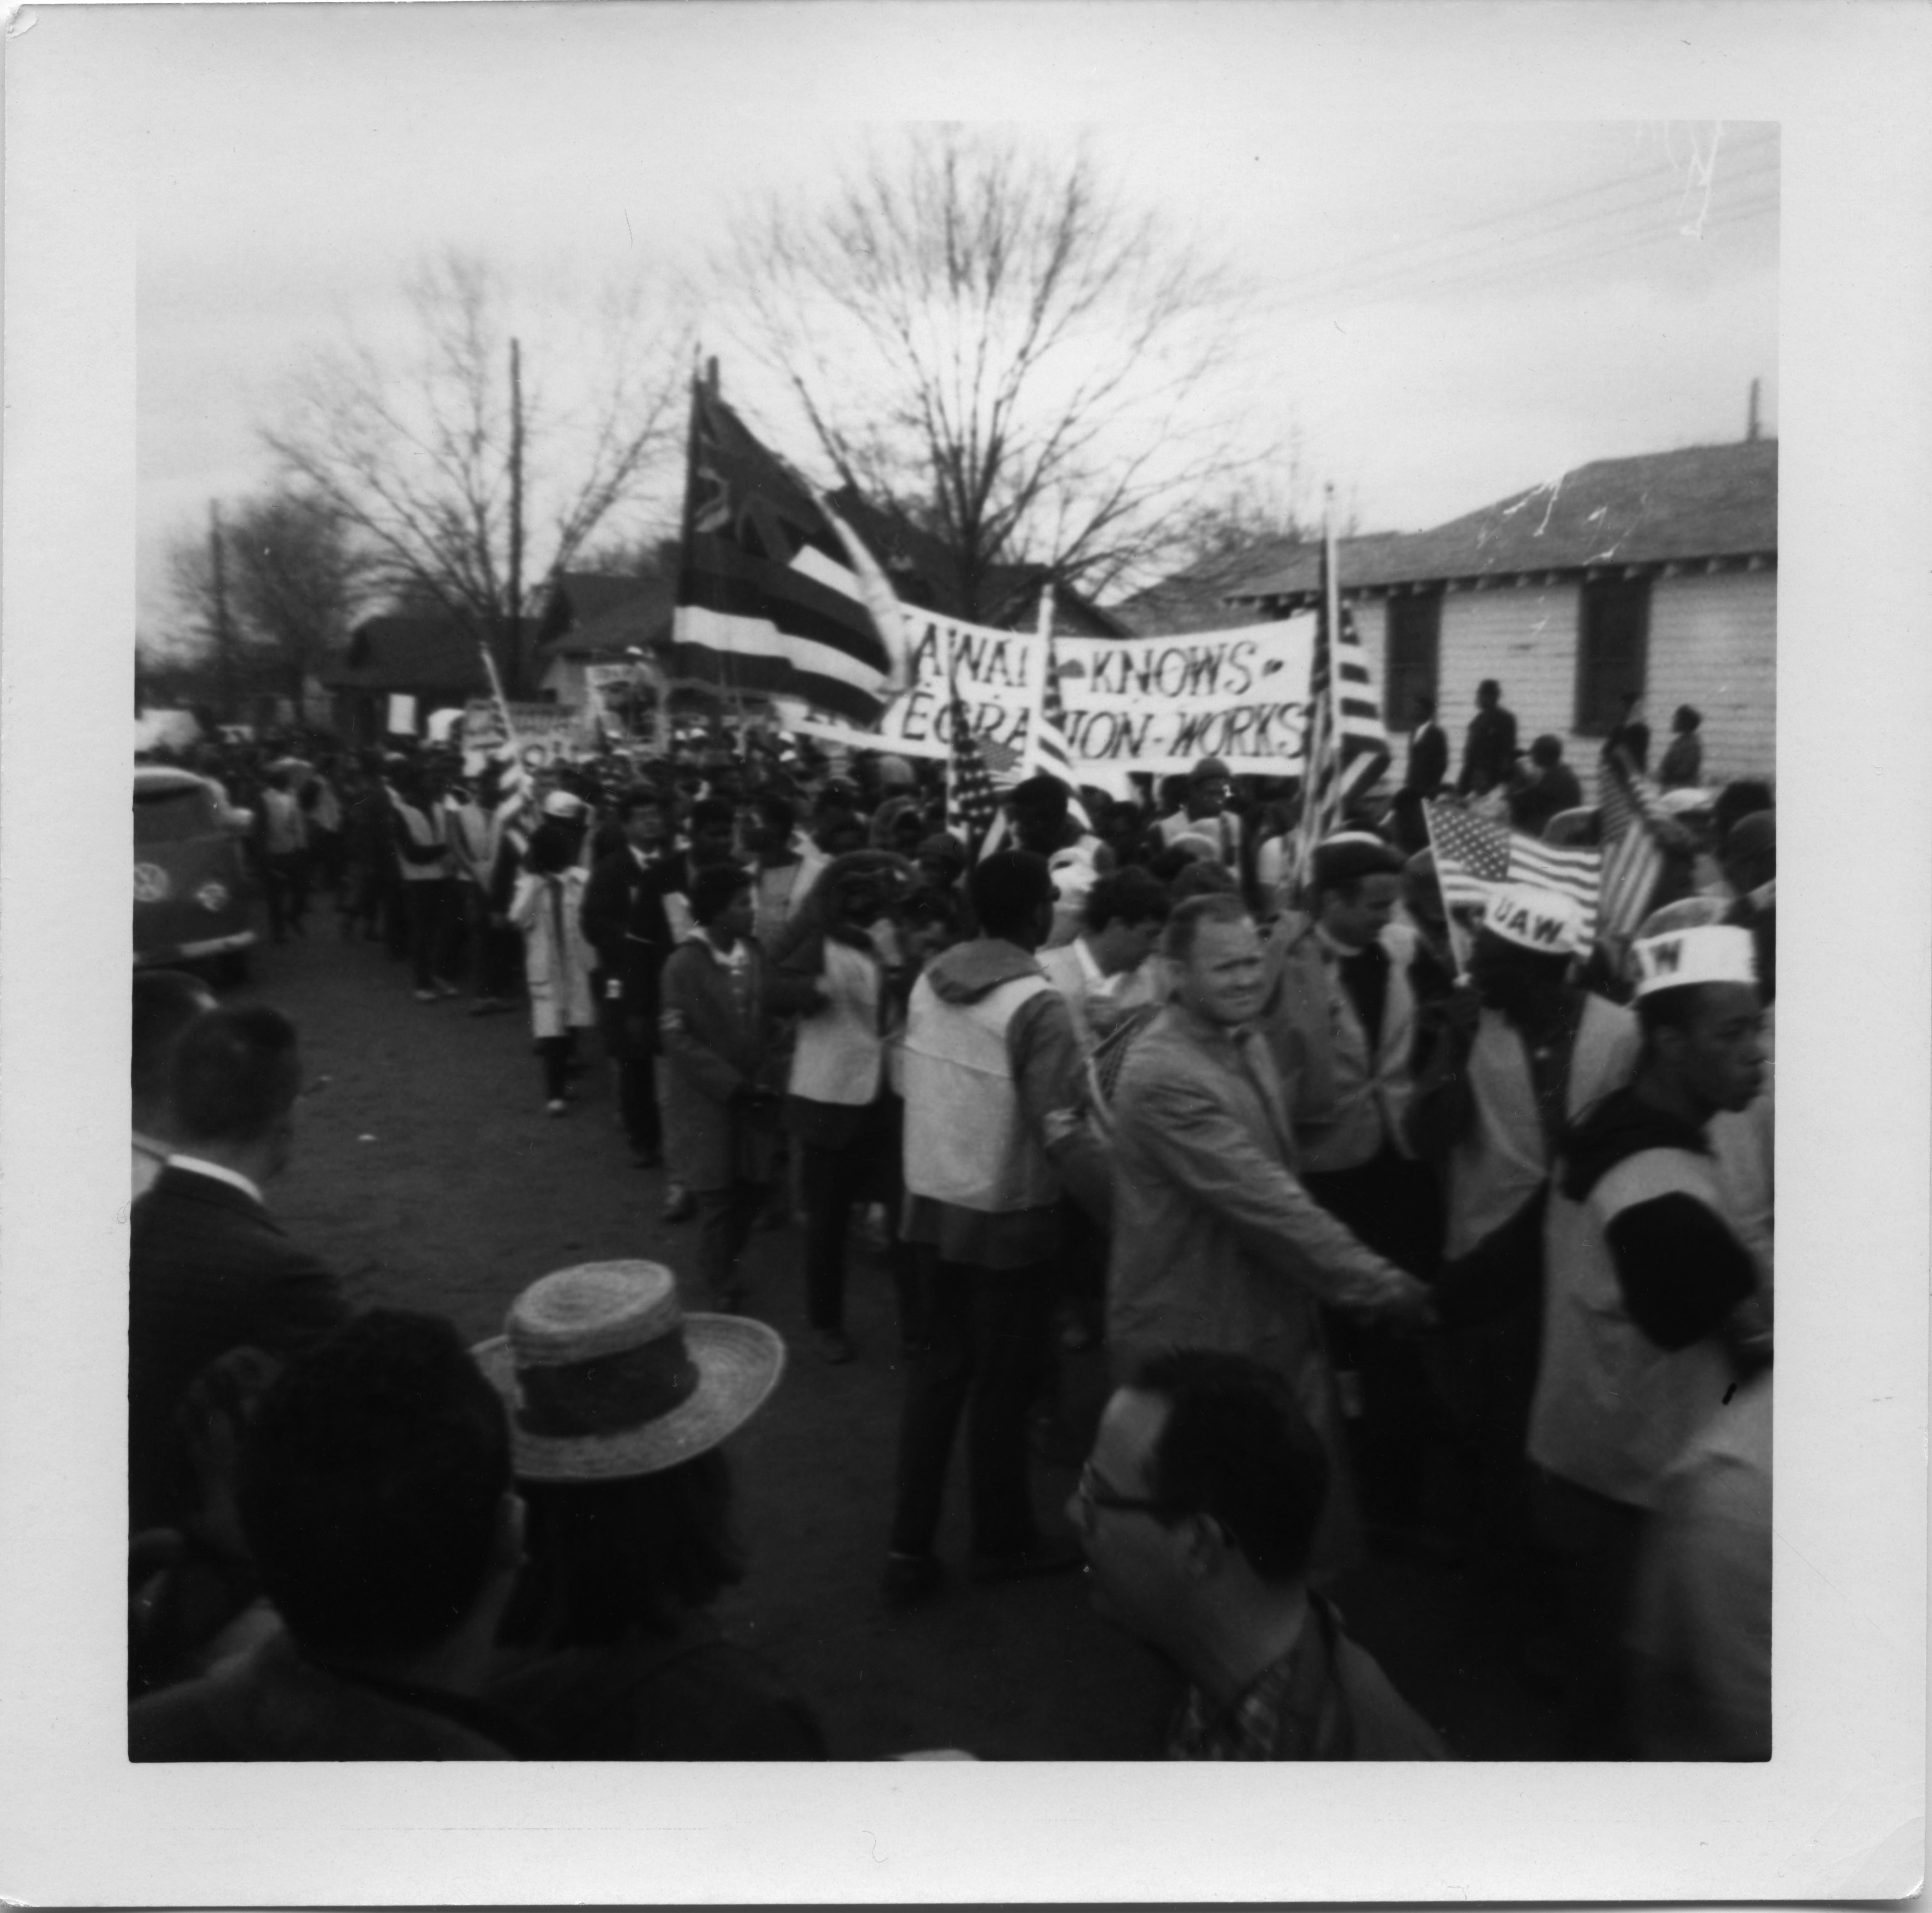 Depiction of Civil rights march from Selma to Montgomery, Ala., March 1965